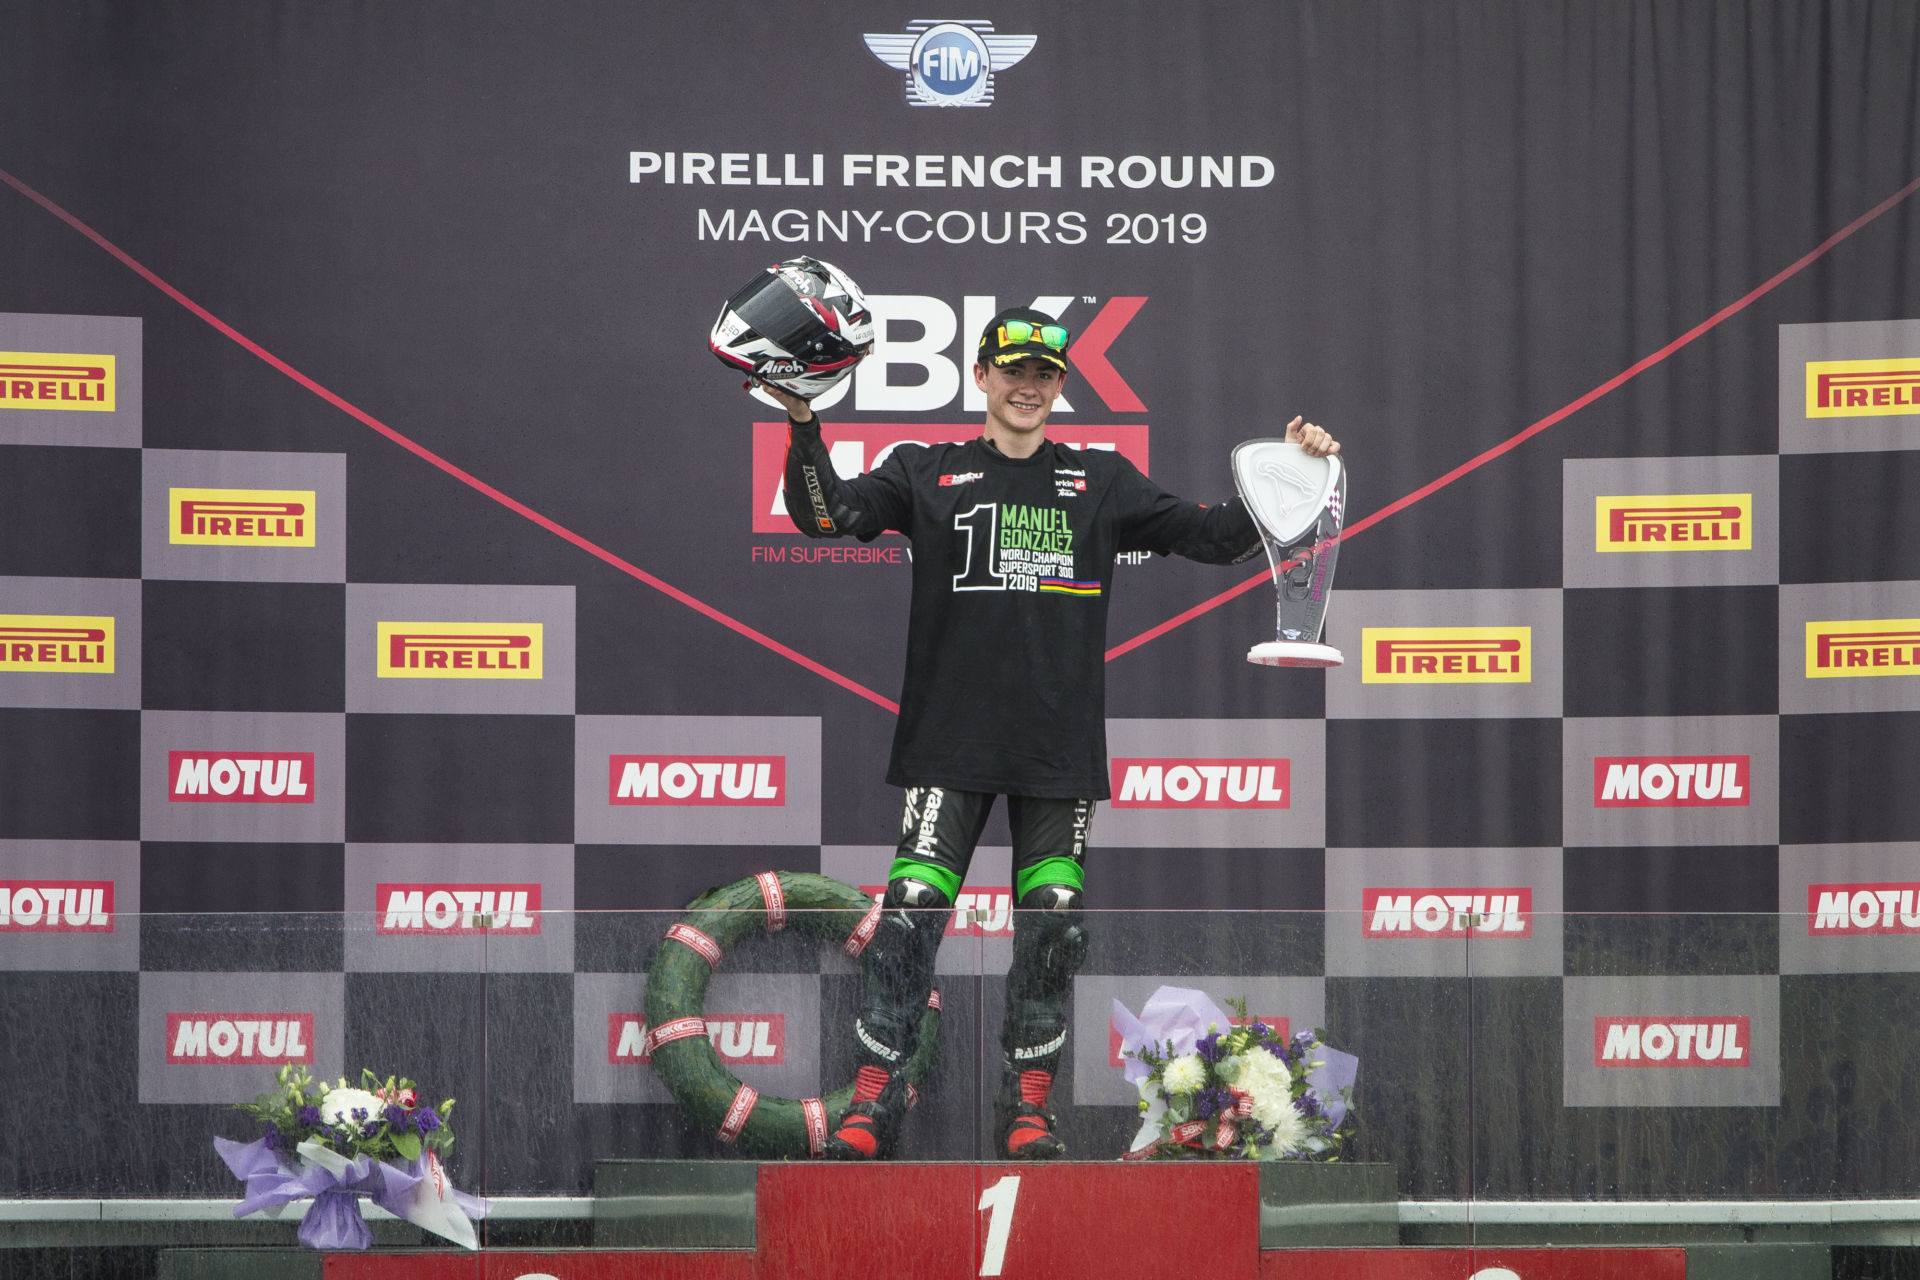 Manuel Gonzalez, the 2019 FIM Supersport 300 World Champion, on the podium at Magny-Cours. Photo courtesy of Kawasaki.